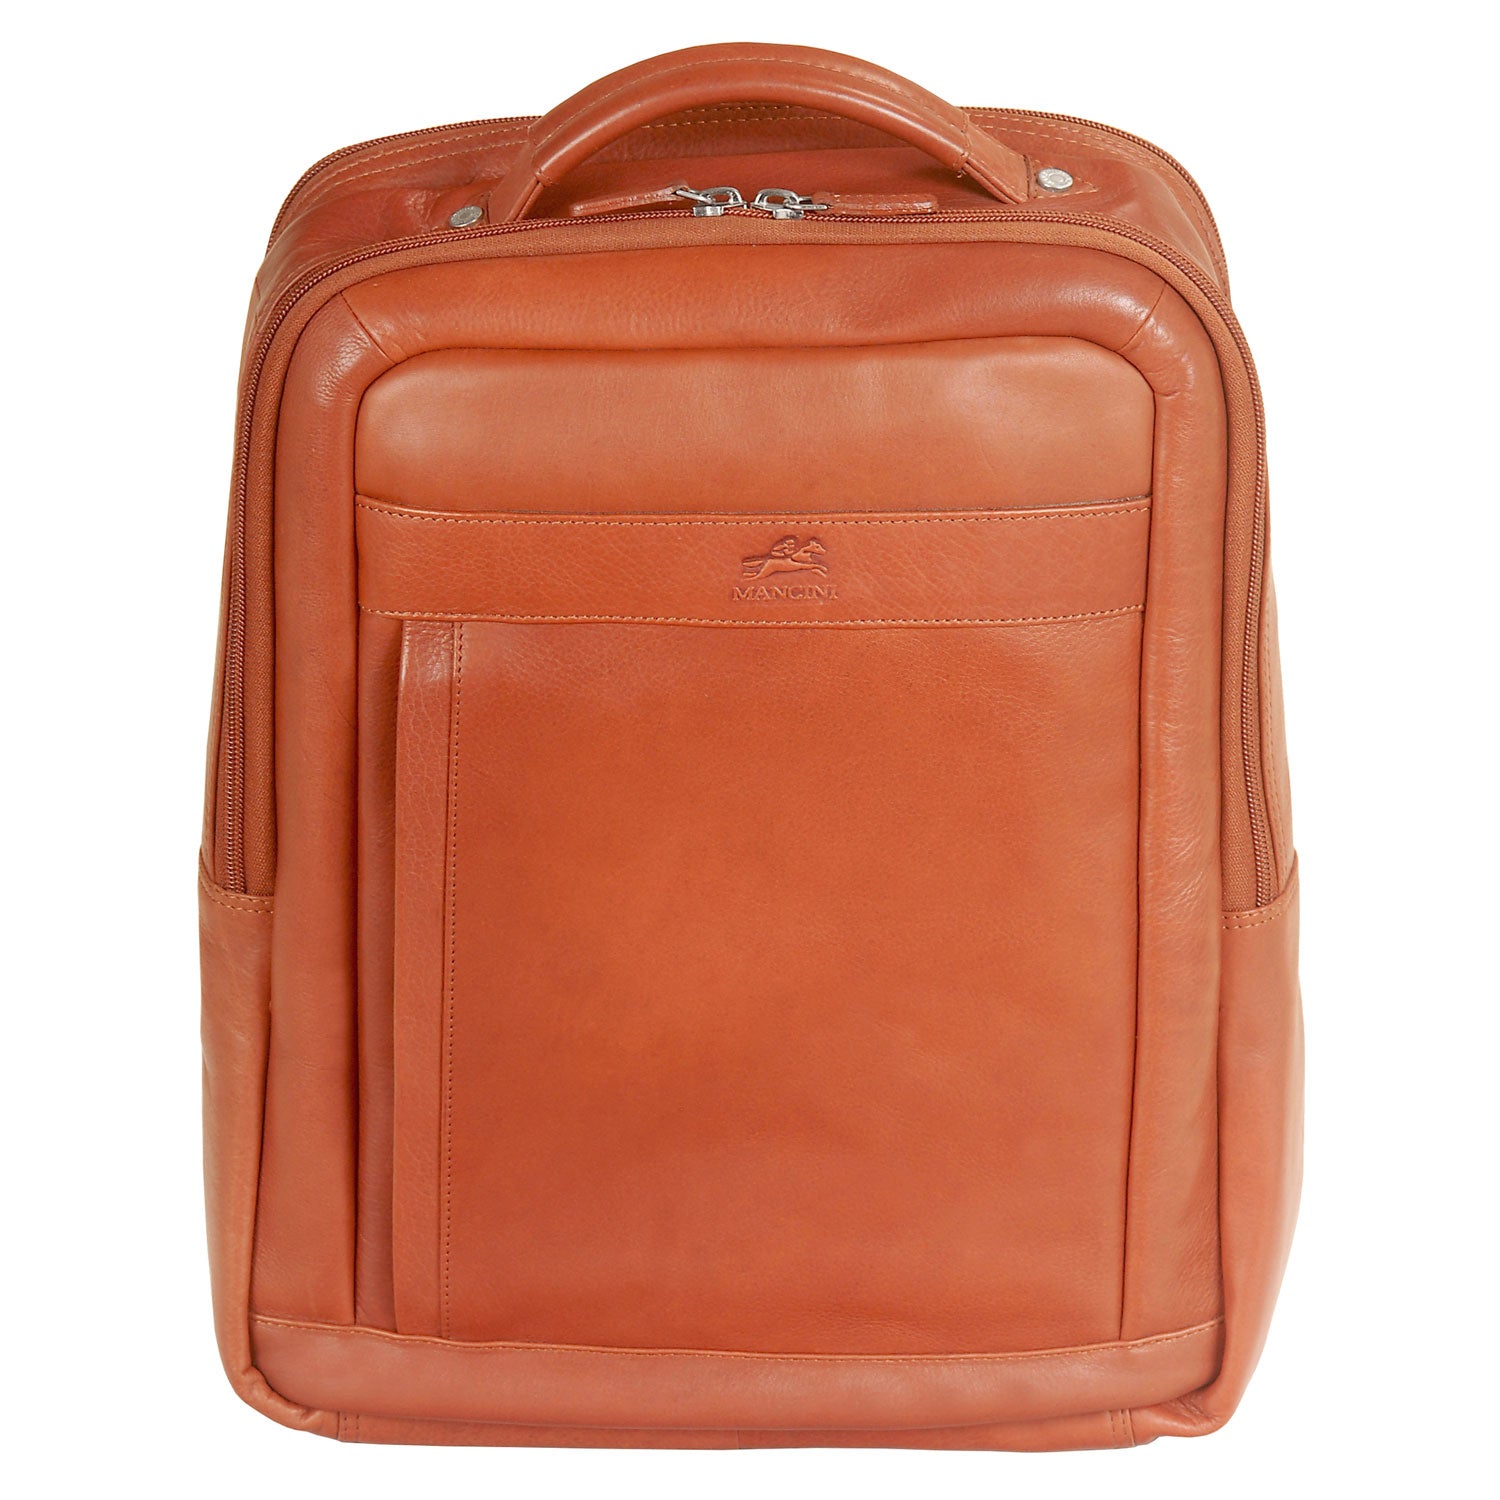 Mancini Leather Backpack for 15.6" Laptop / Tablet, 12" x 5.25" x 15", Cognac